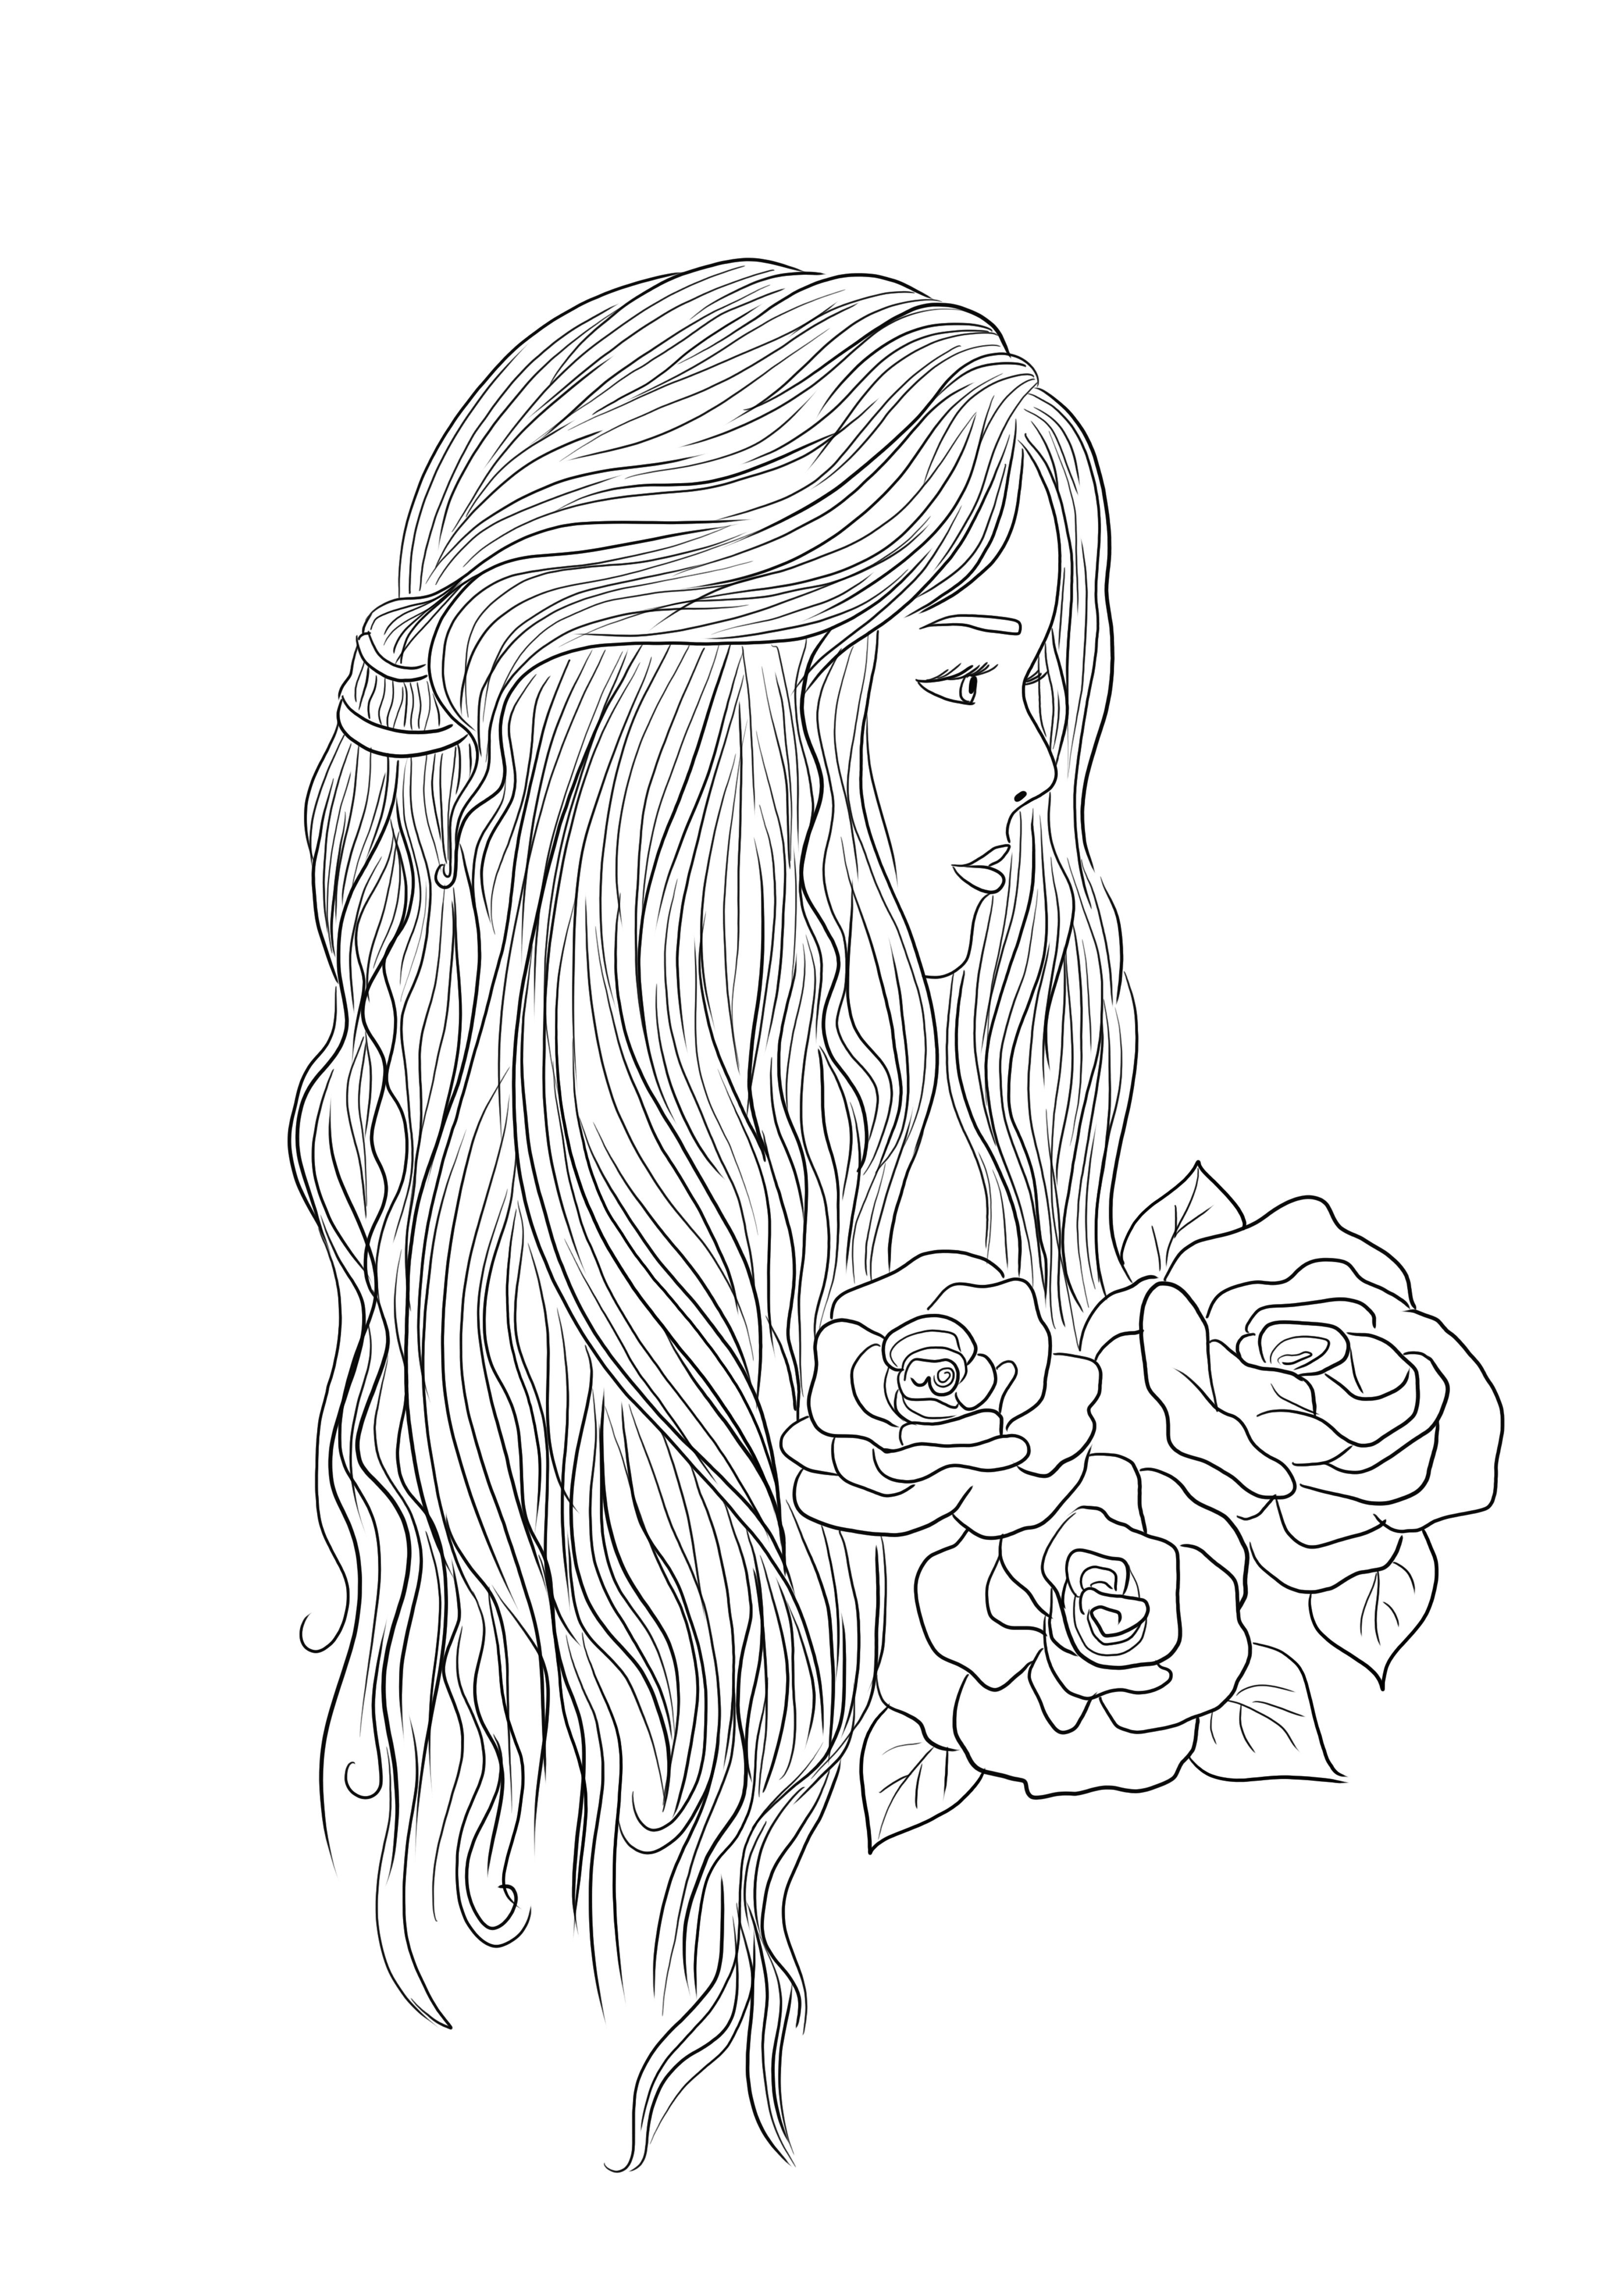 Beautiful woman and roses free printable to color image for kids